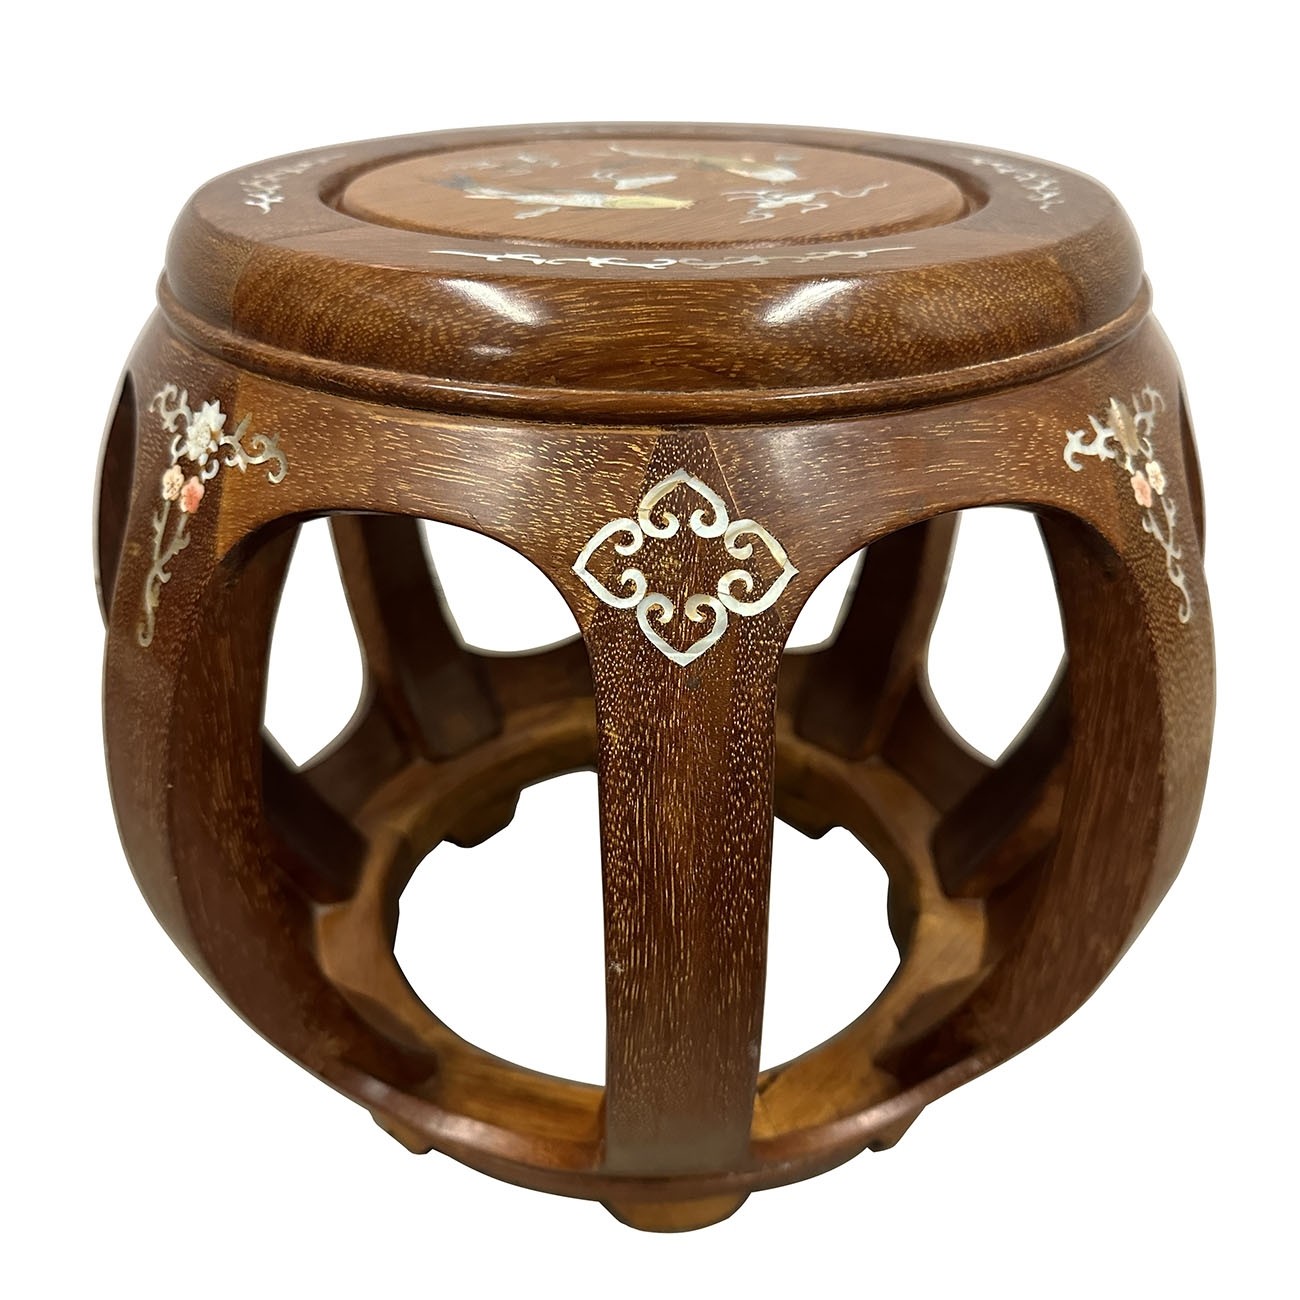 Mid-20th Century Chinese Rosewood Stool with Mather of Pearl inlay